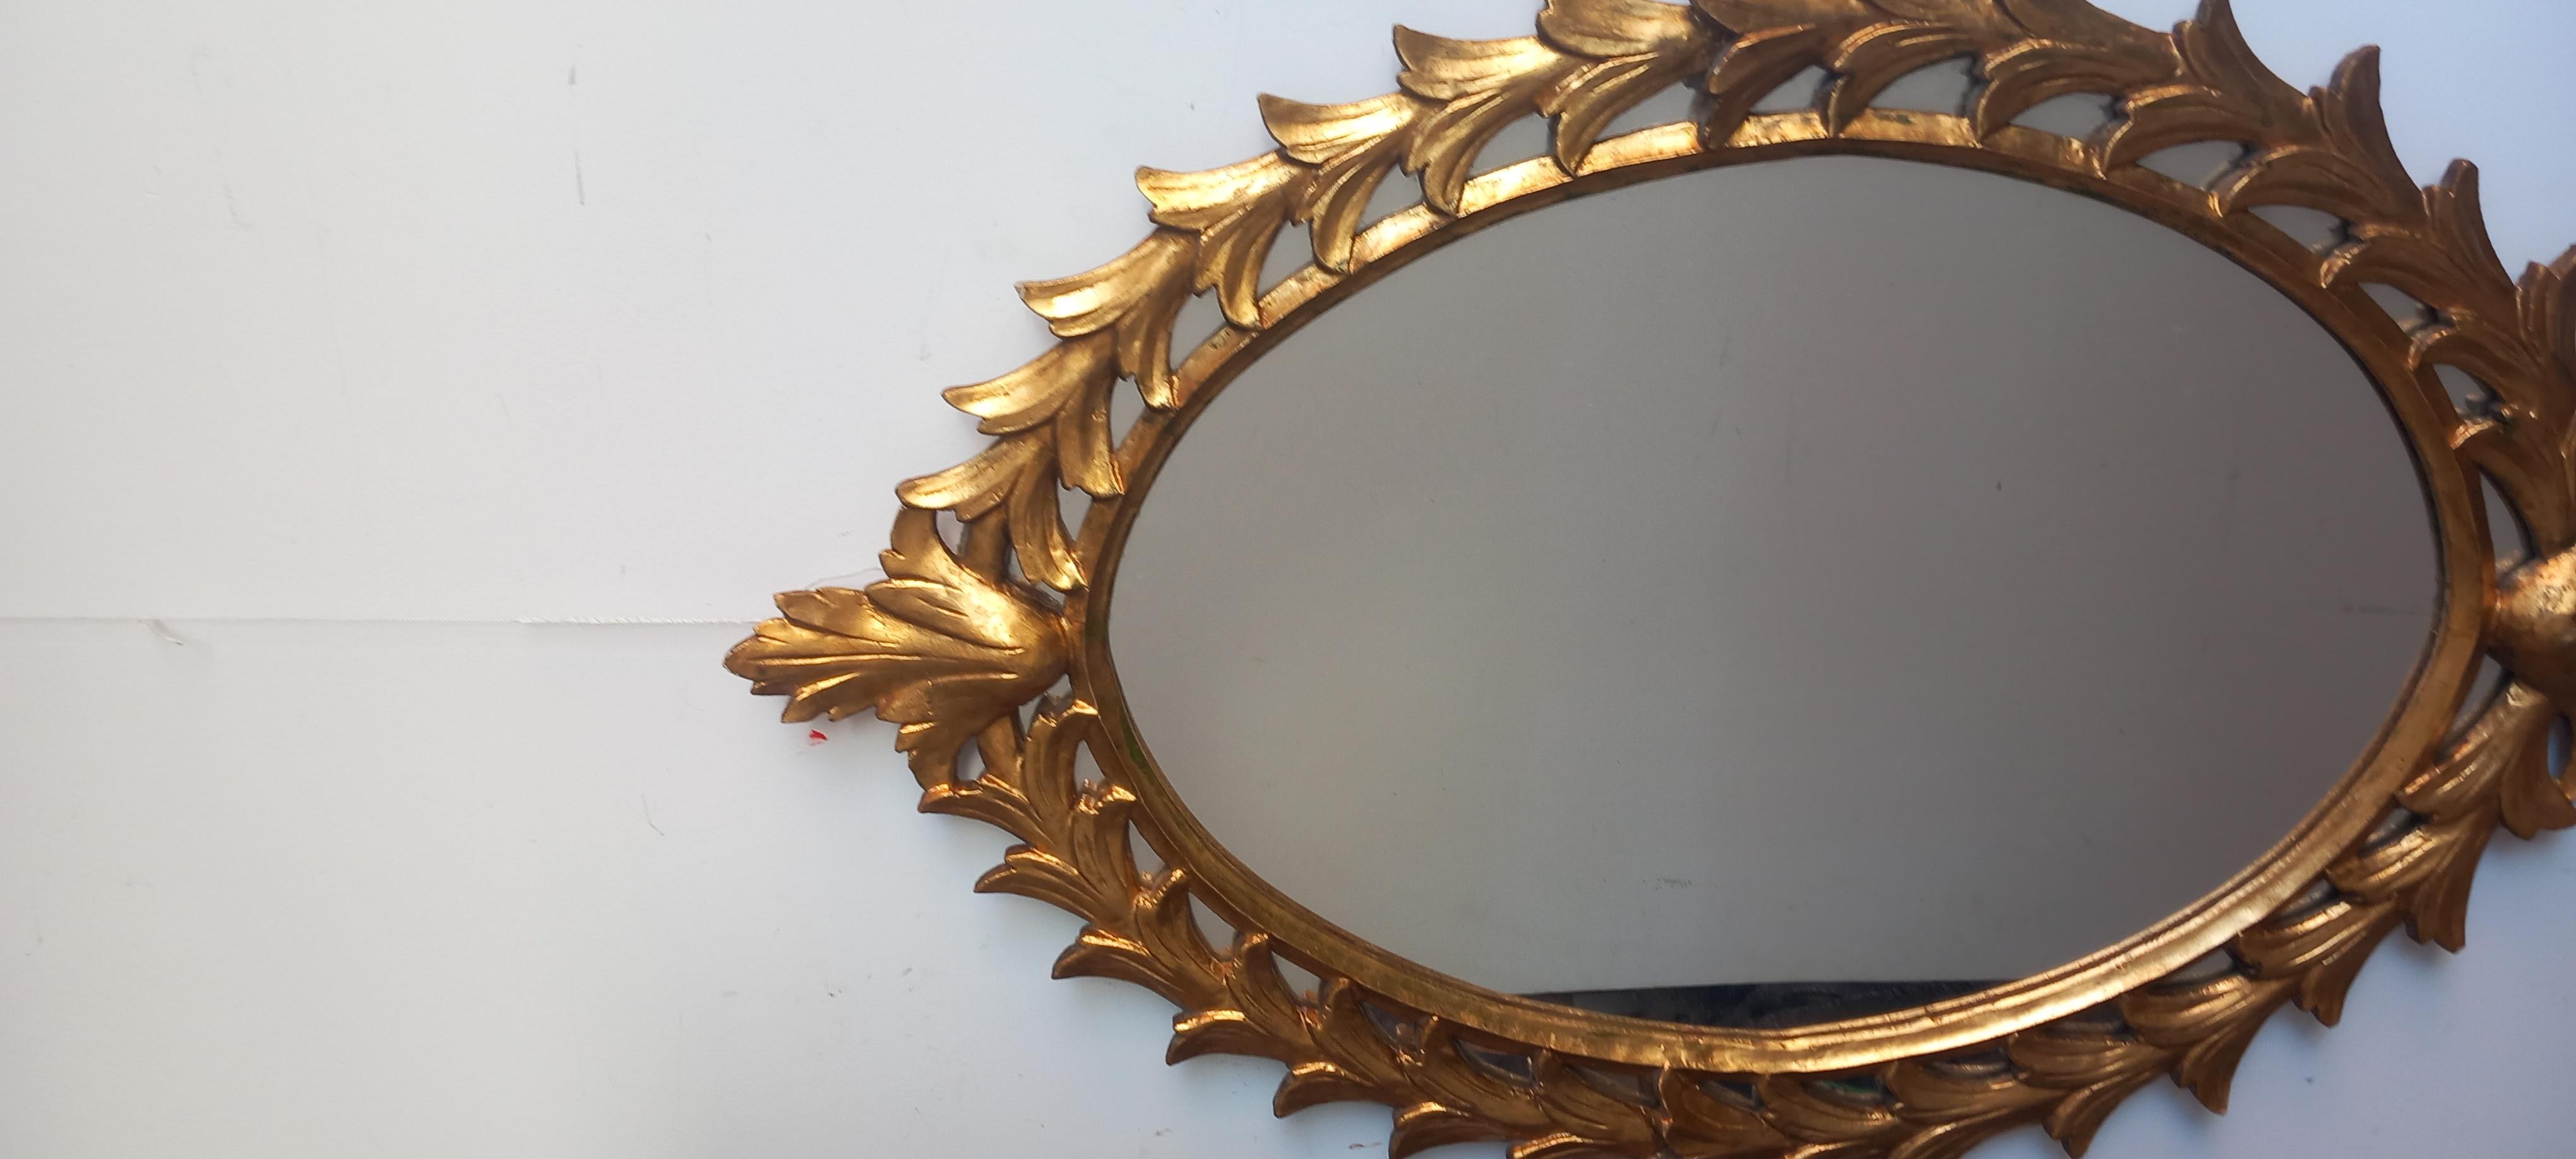 Mirror Large Wooden Acanthus Leaves Glod Leaf Mid-20th Century.  Italy For Sale 6